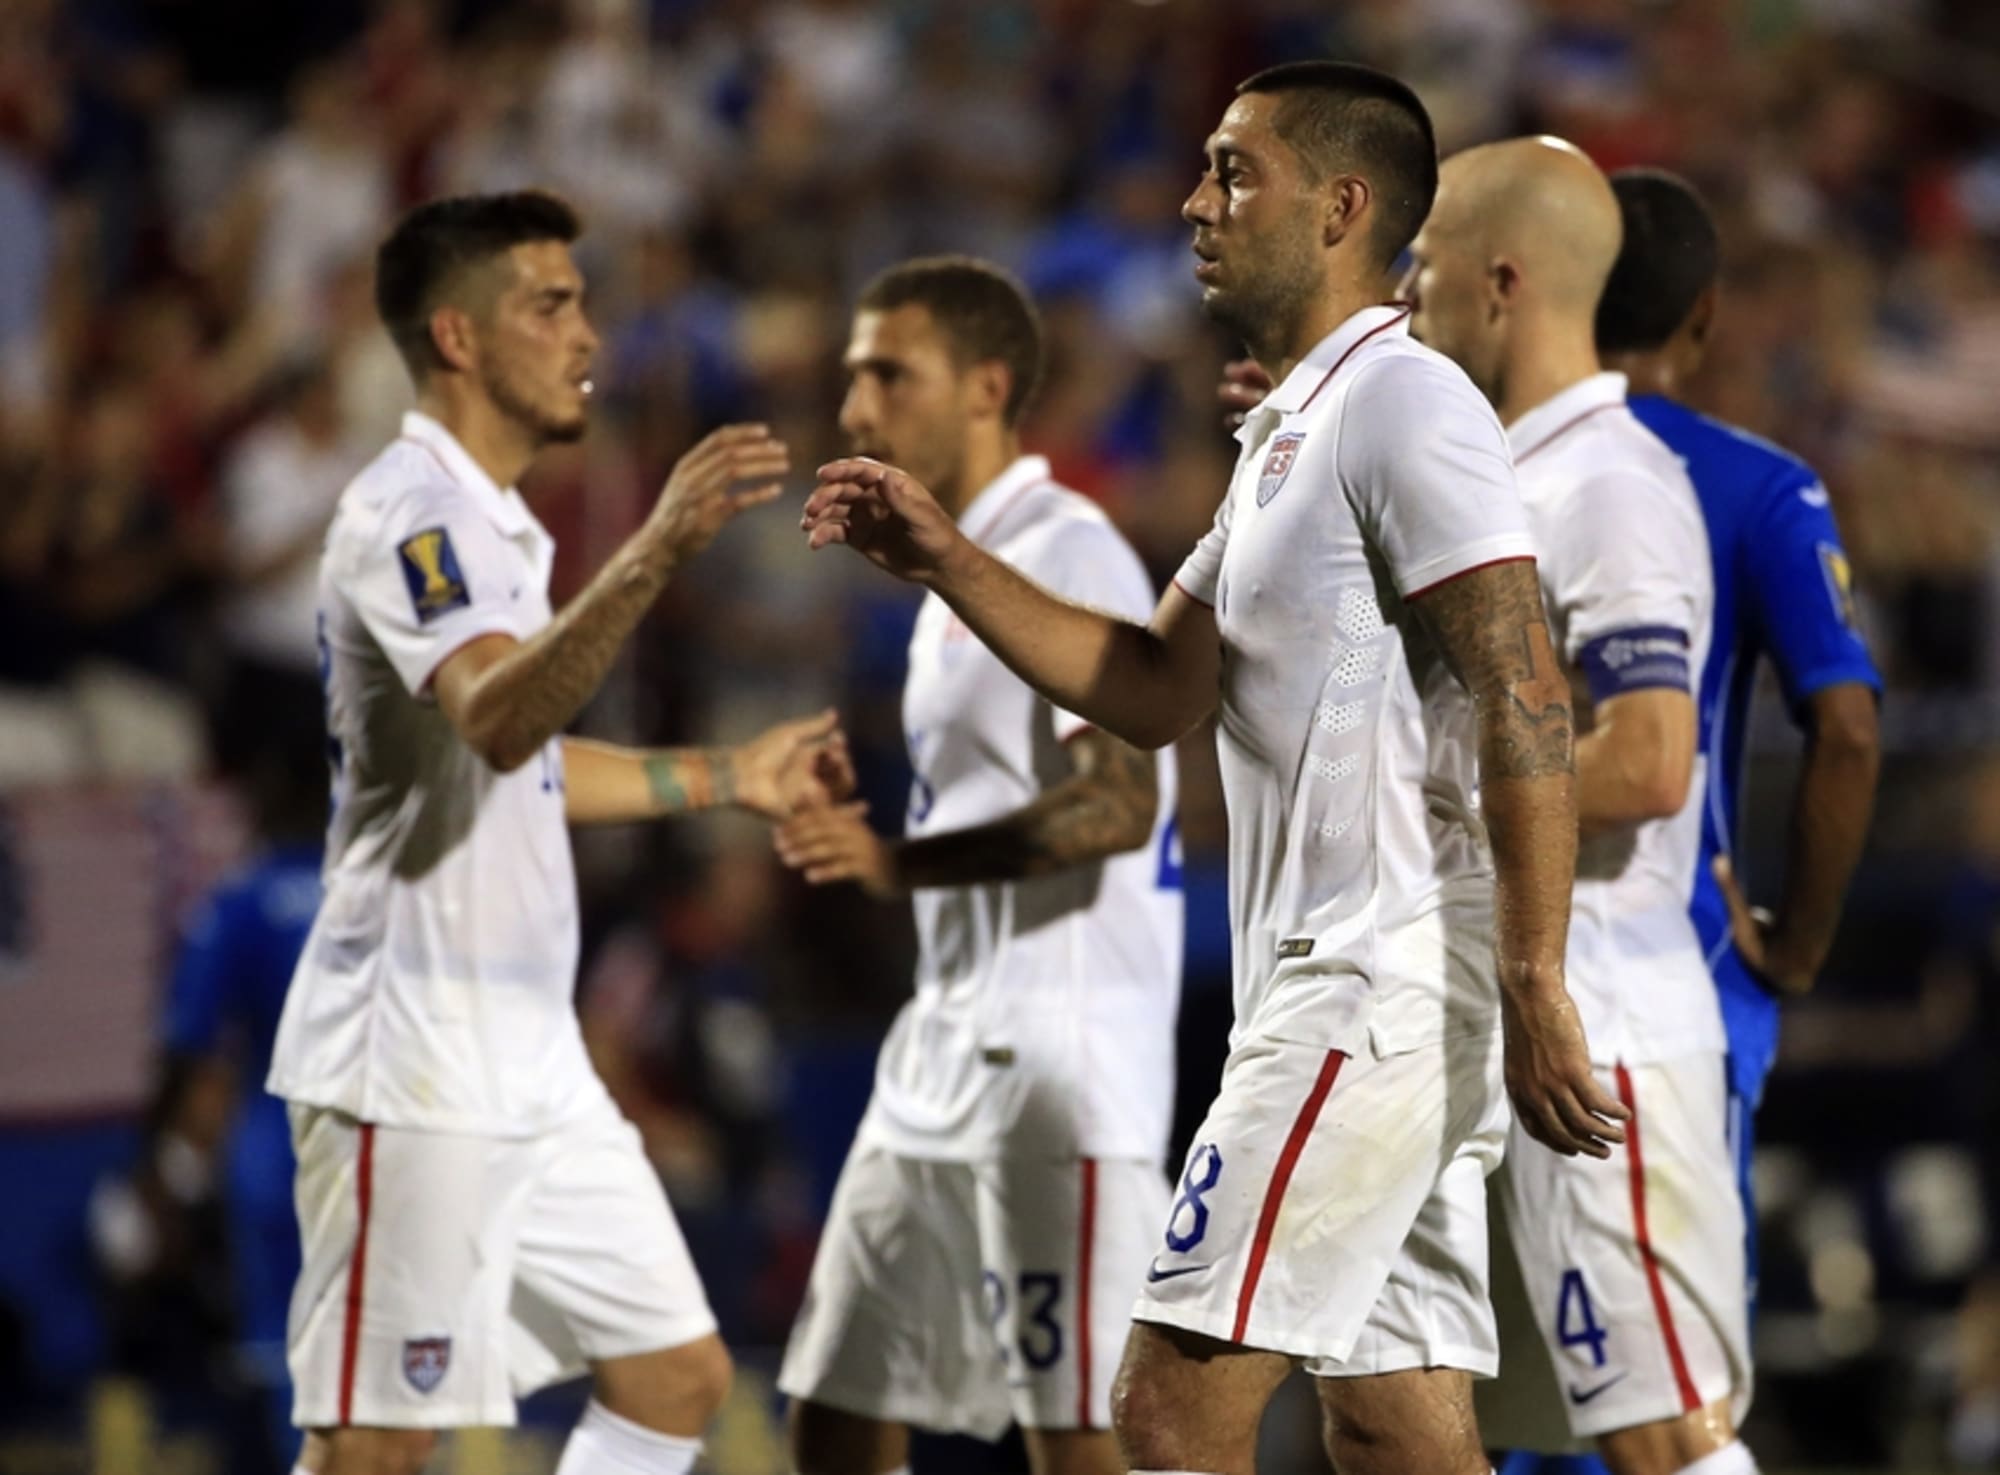 Gold Cup: USA vs Panama - Game Preview, Predictions, and Lineup